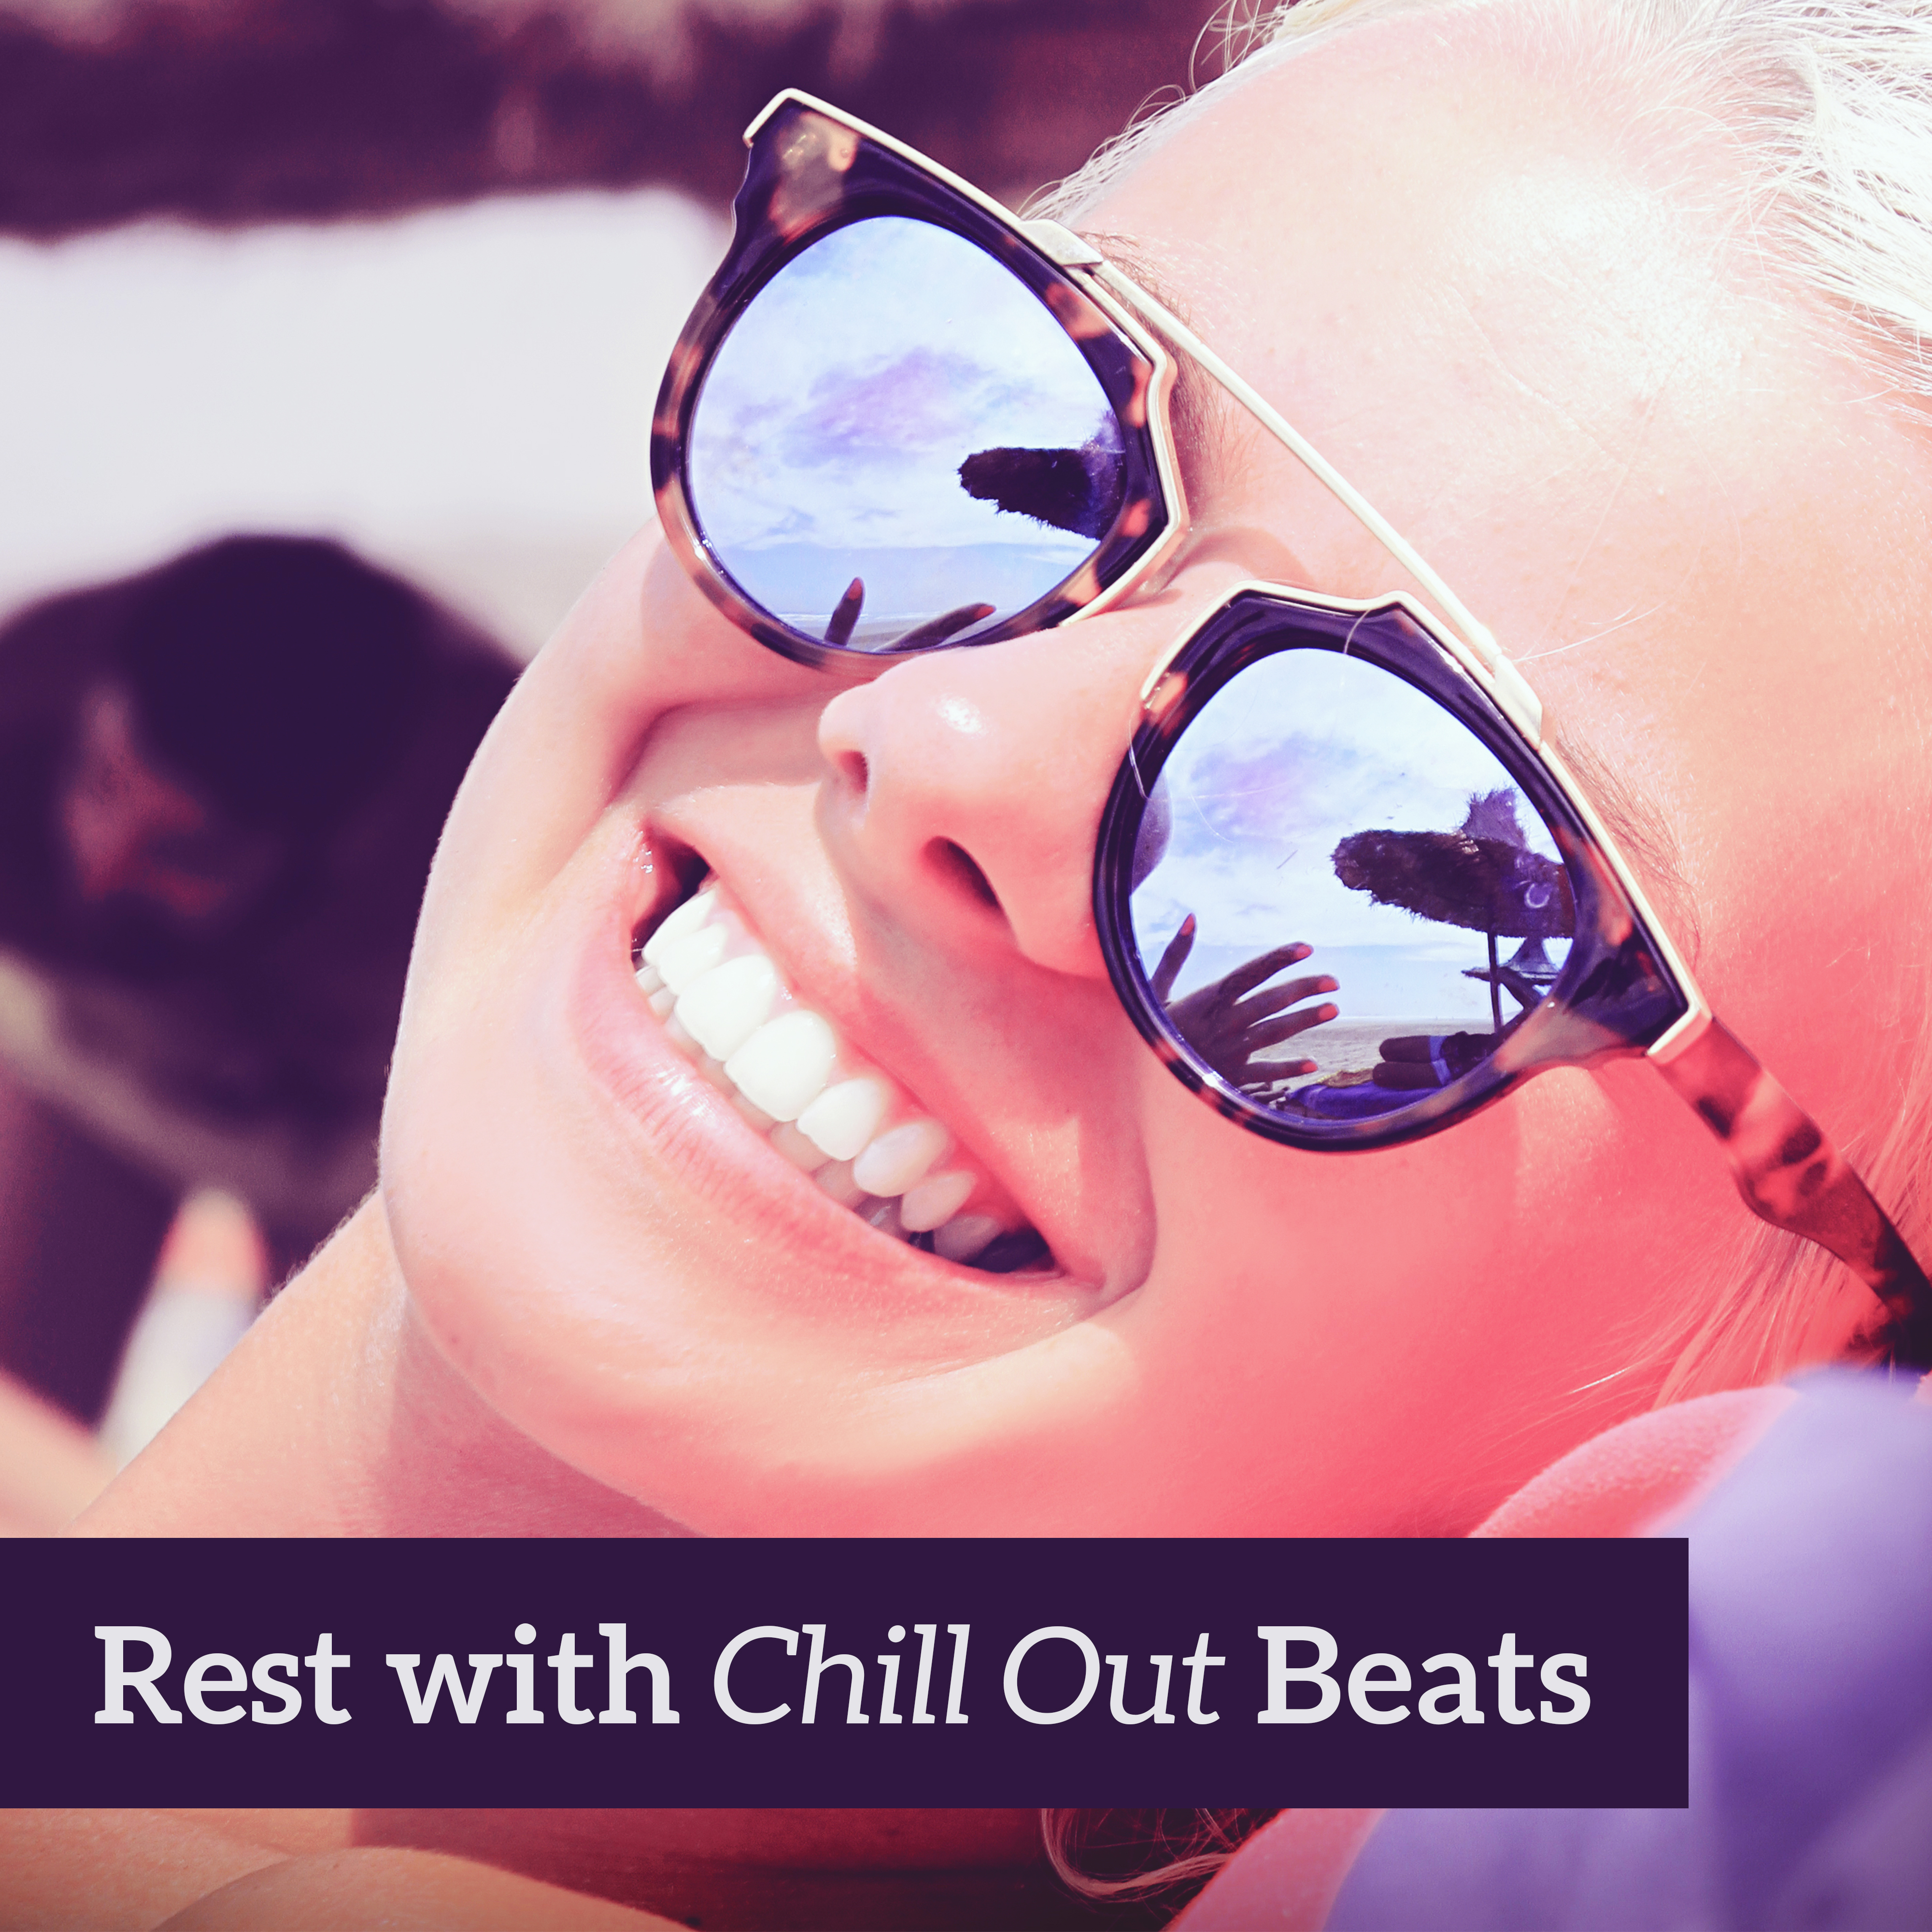 Rest with Chill Out Beats – Soft Songs to Rest, Tropical Island Music, Hot Sun Melodies